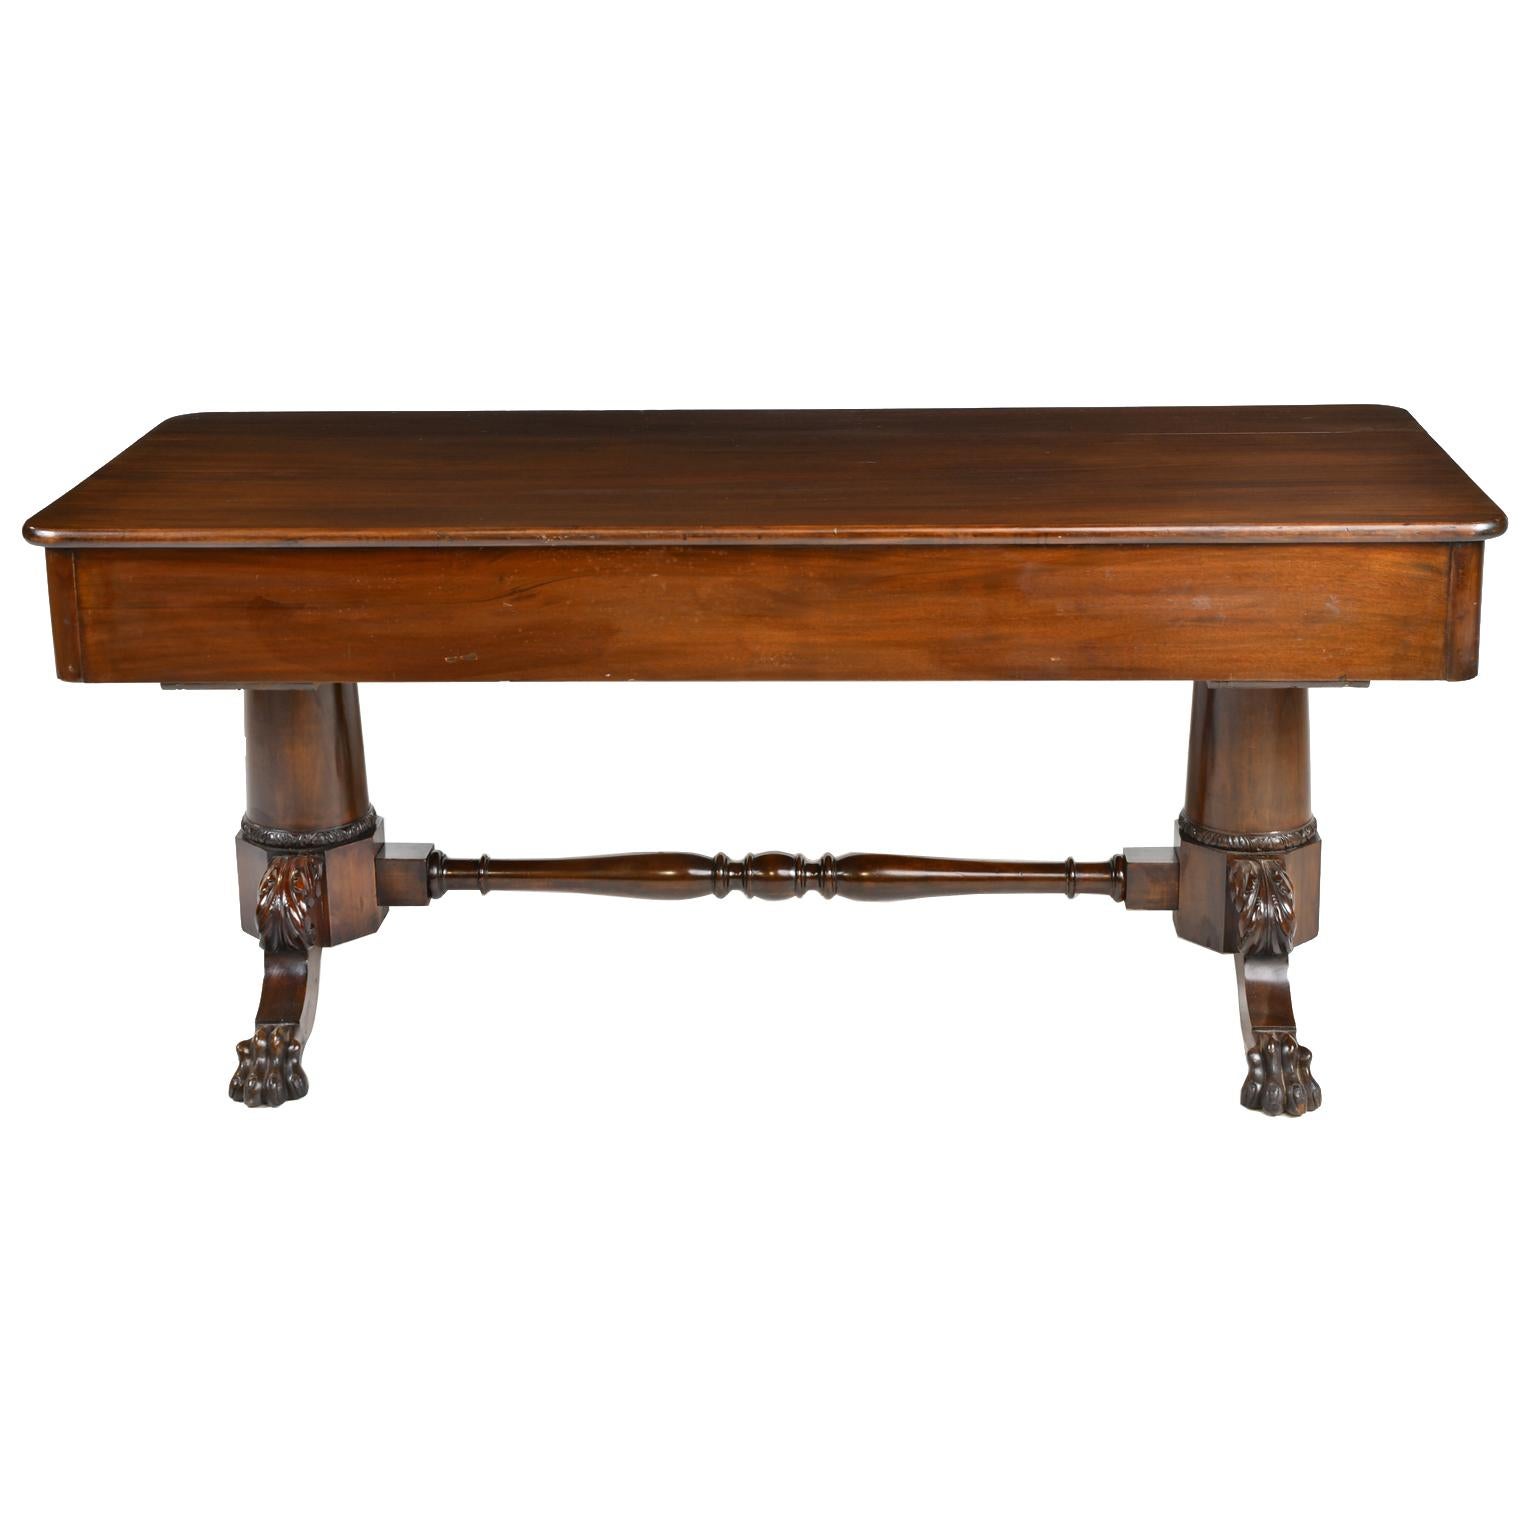 A very handsome and functional classical American bureau desk in dark Cuban mahogany, likely from Philadelphia. Offers three drawers along the apron, one longer center drawer flanked by a drawer on each side, all with convex fronts and original